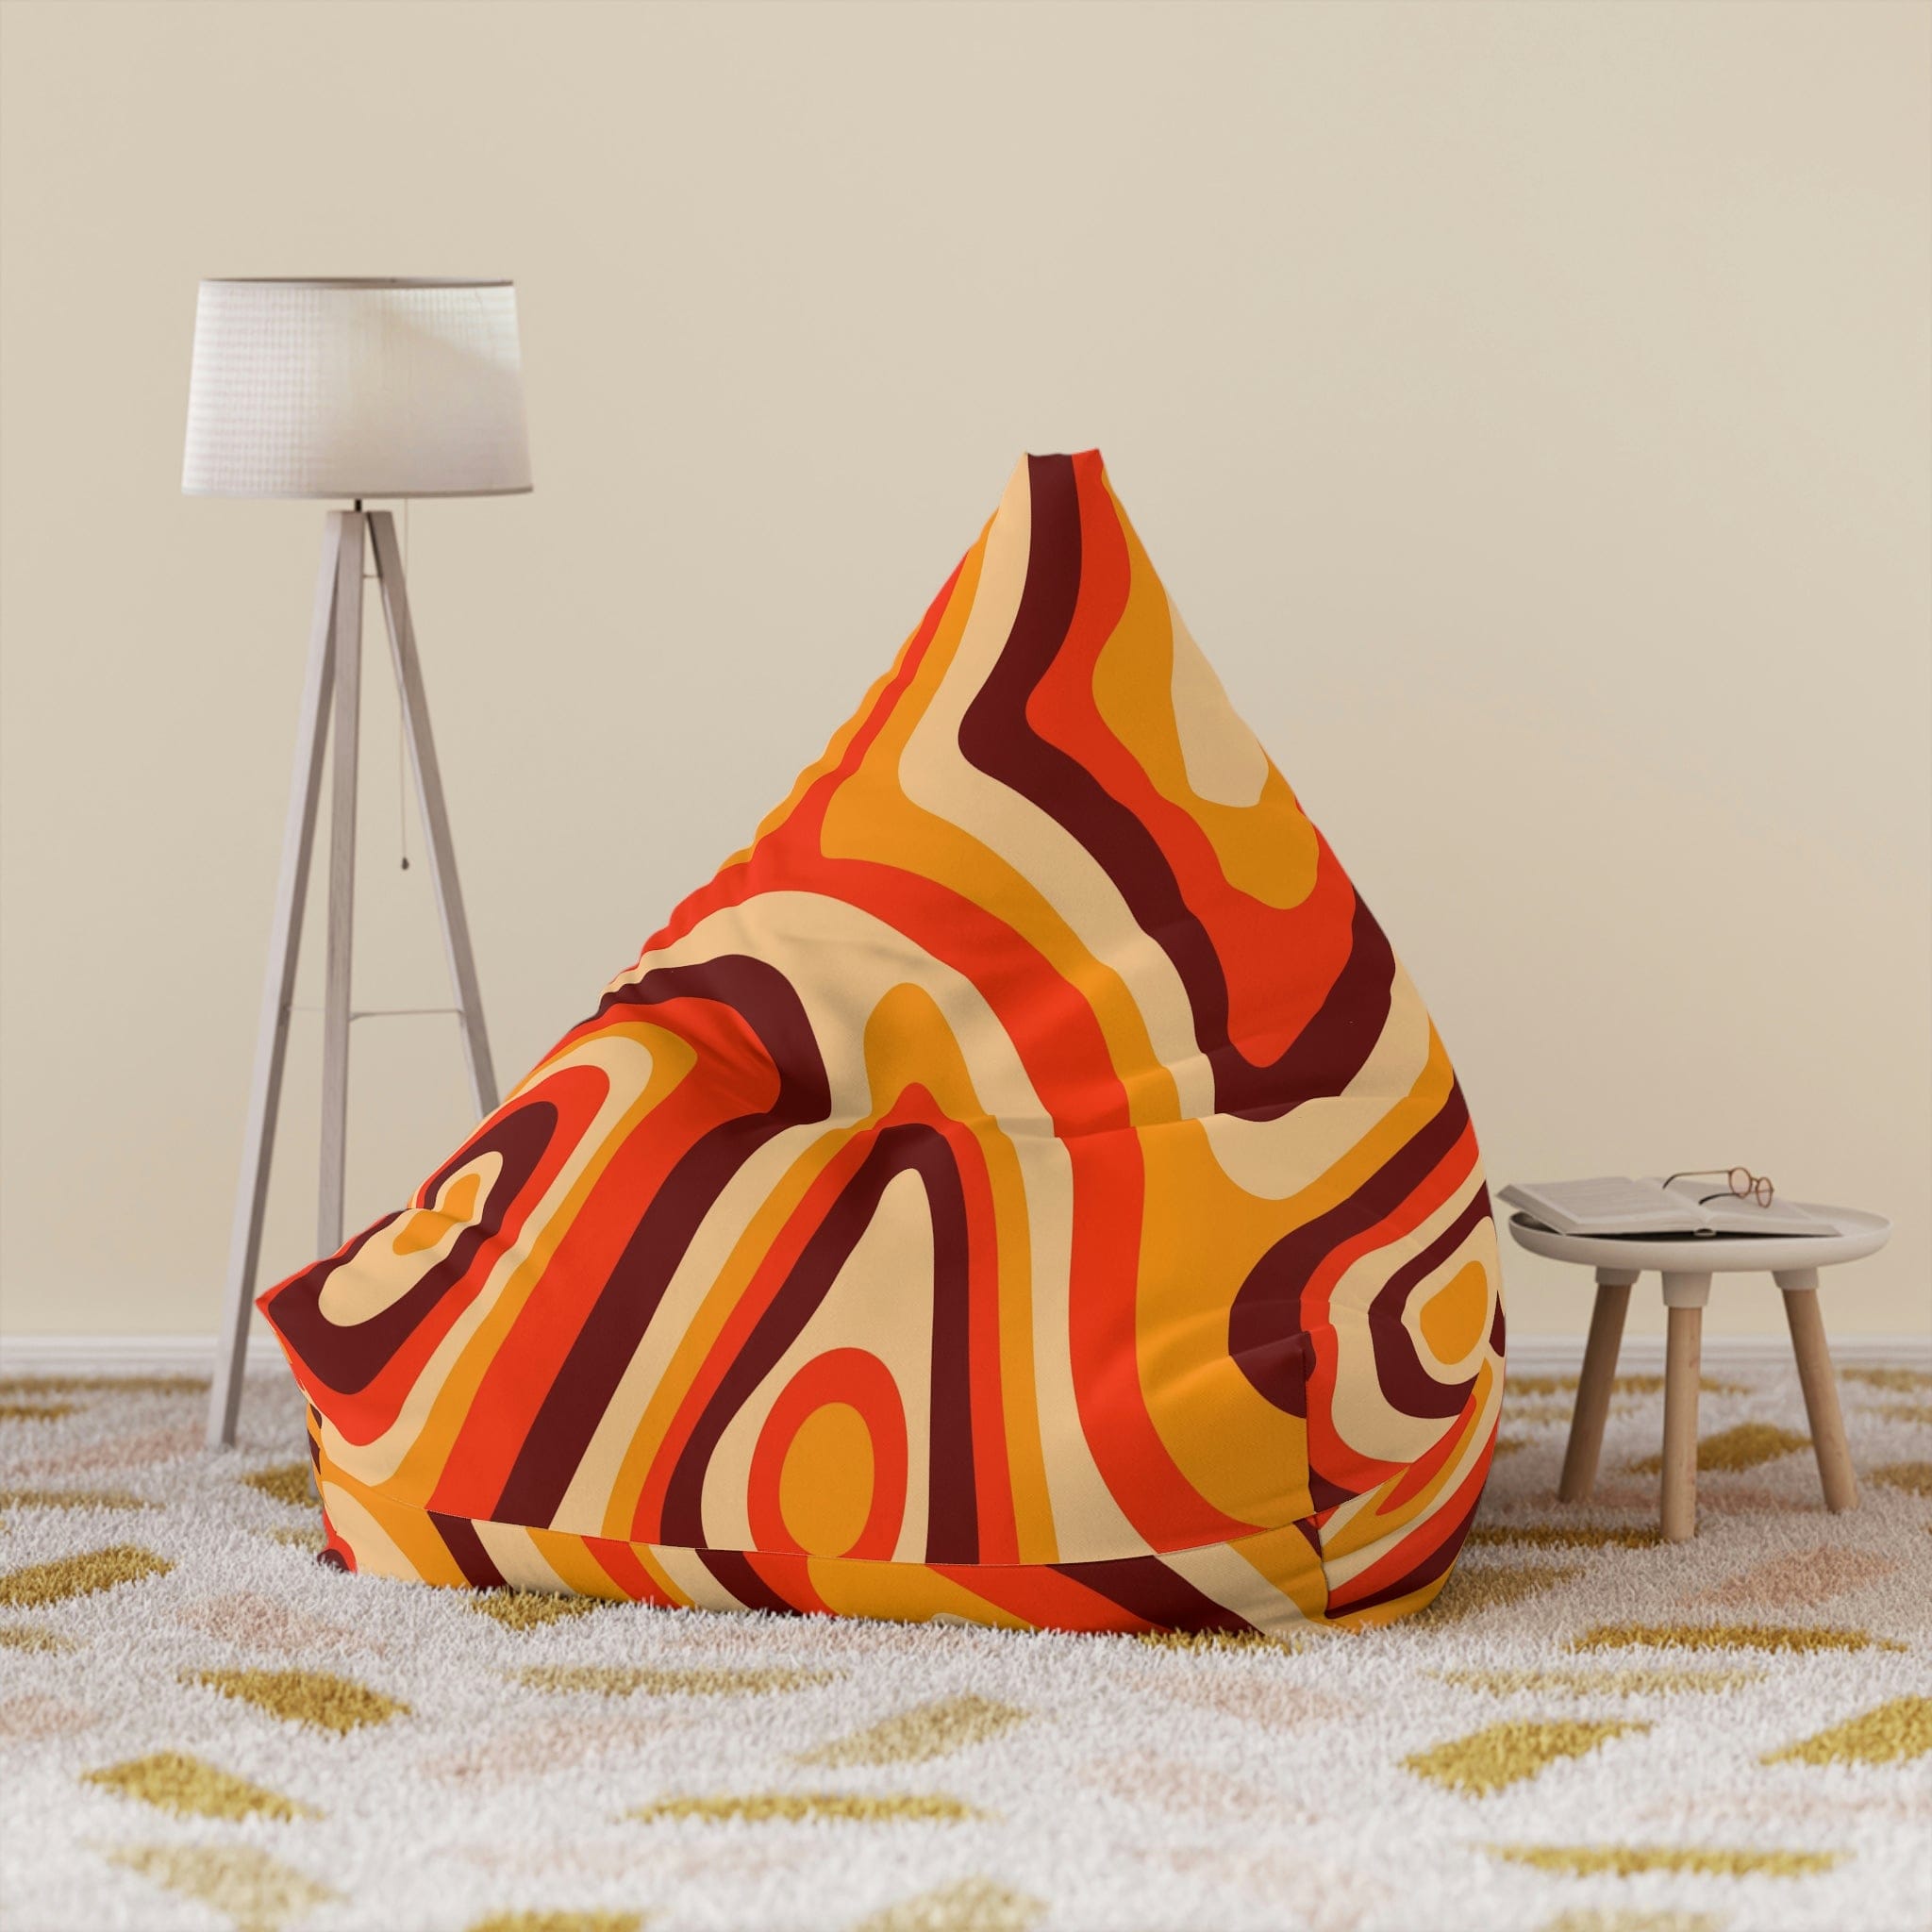 Retro Psychedelic Groovy Bean Bag Chair Cover – Kate McEnroe New York